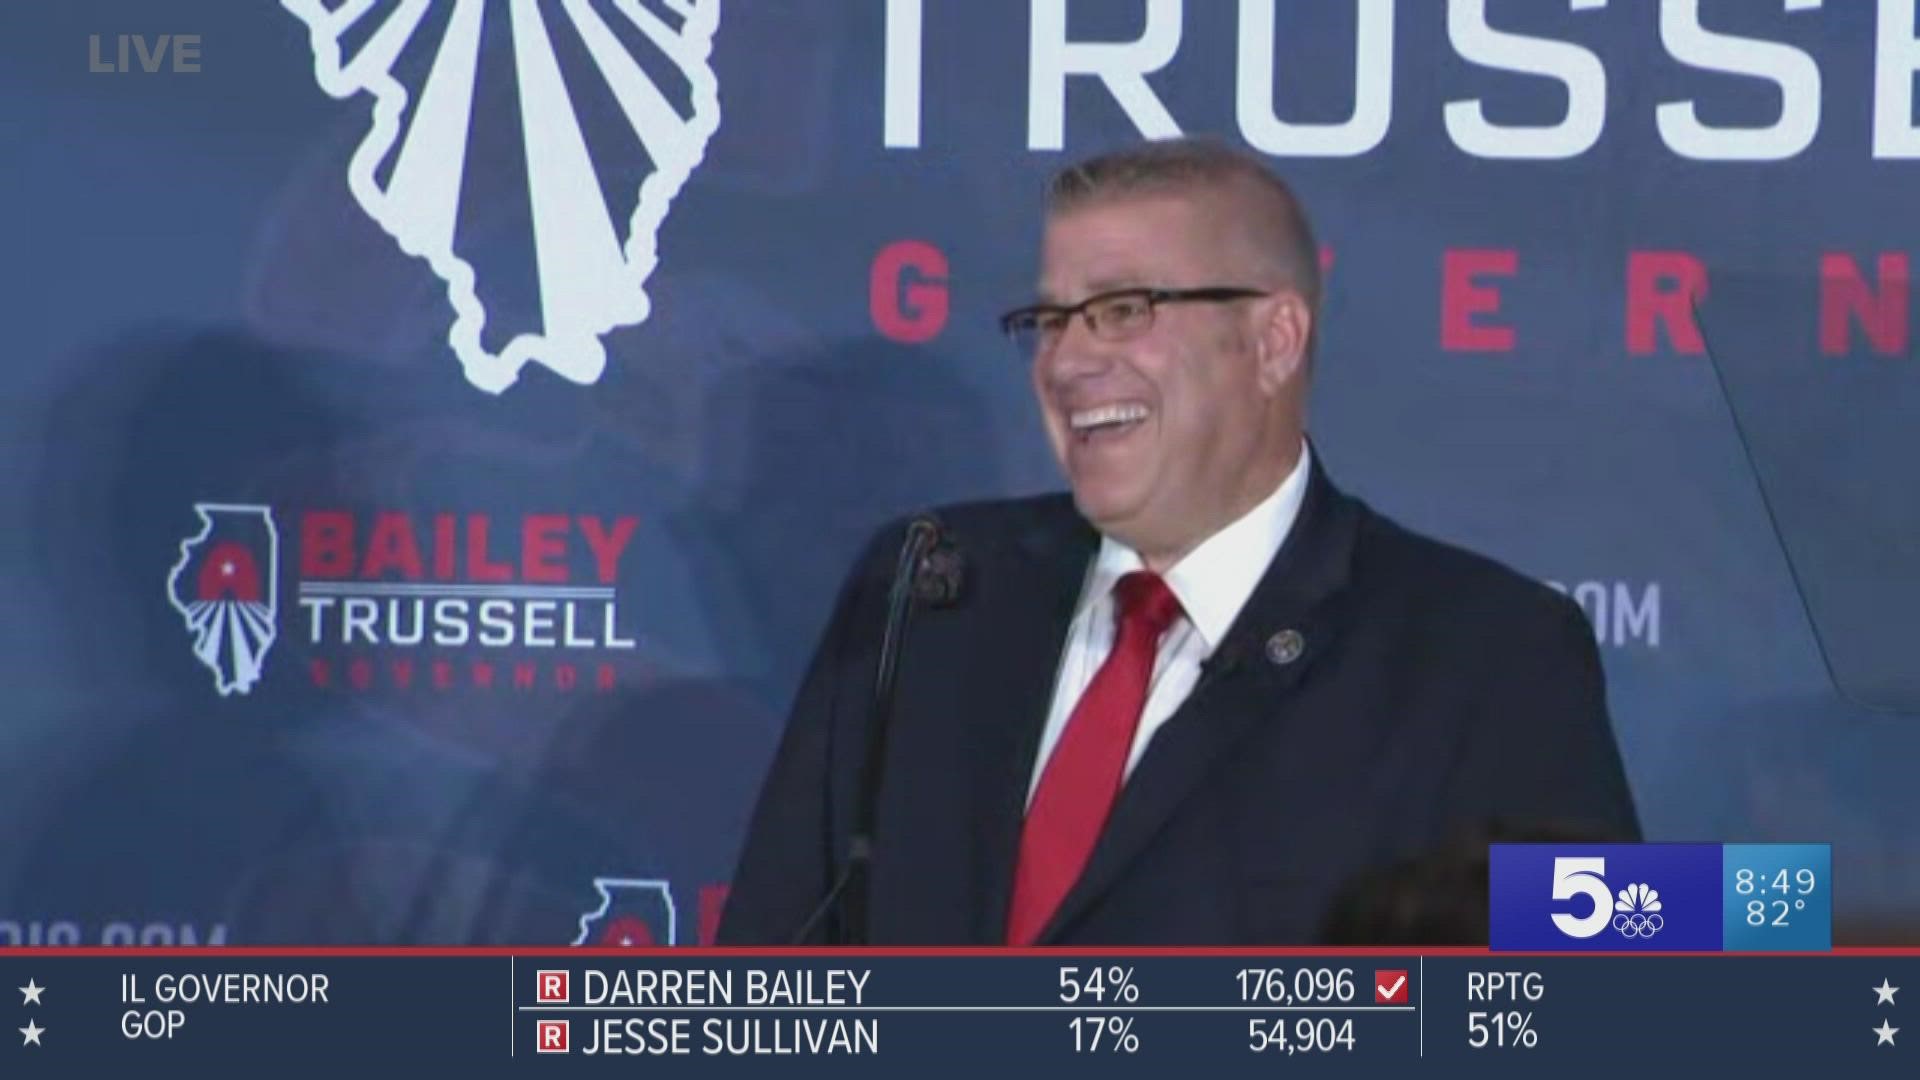 Bailey is the projected Republican nominee for Illinois governor. He will run against incumbent J.B. Pritzker.